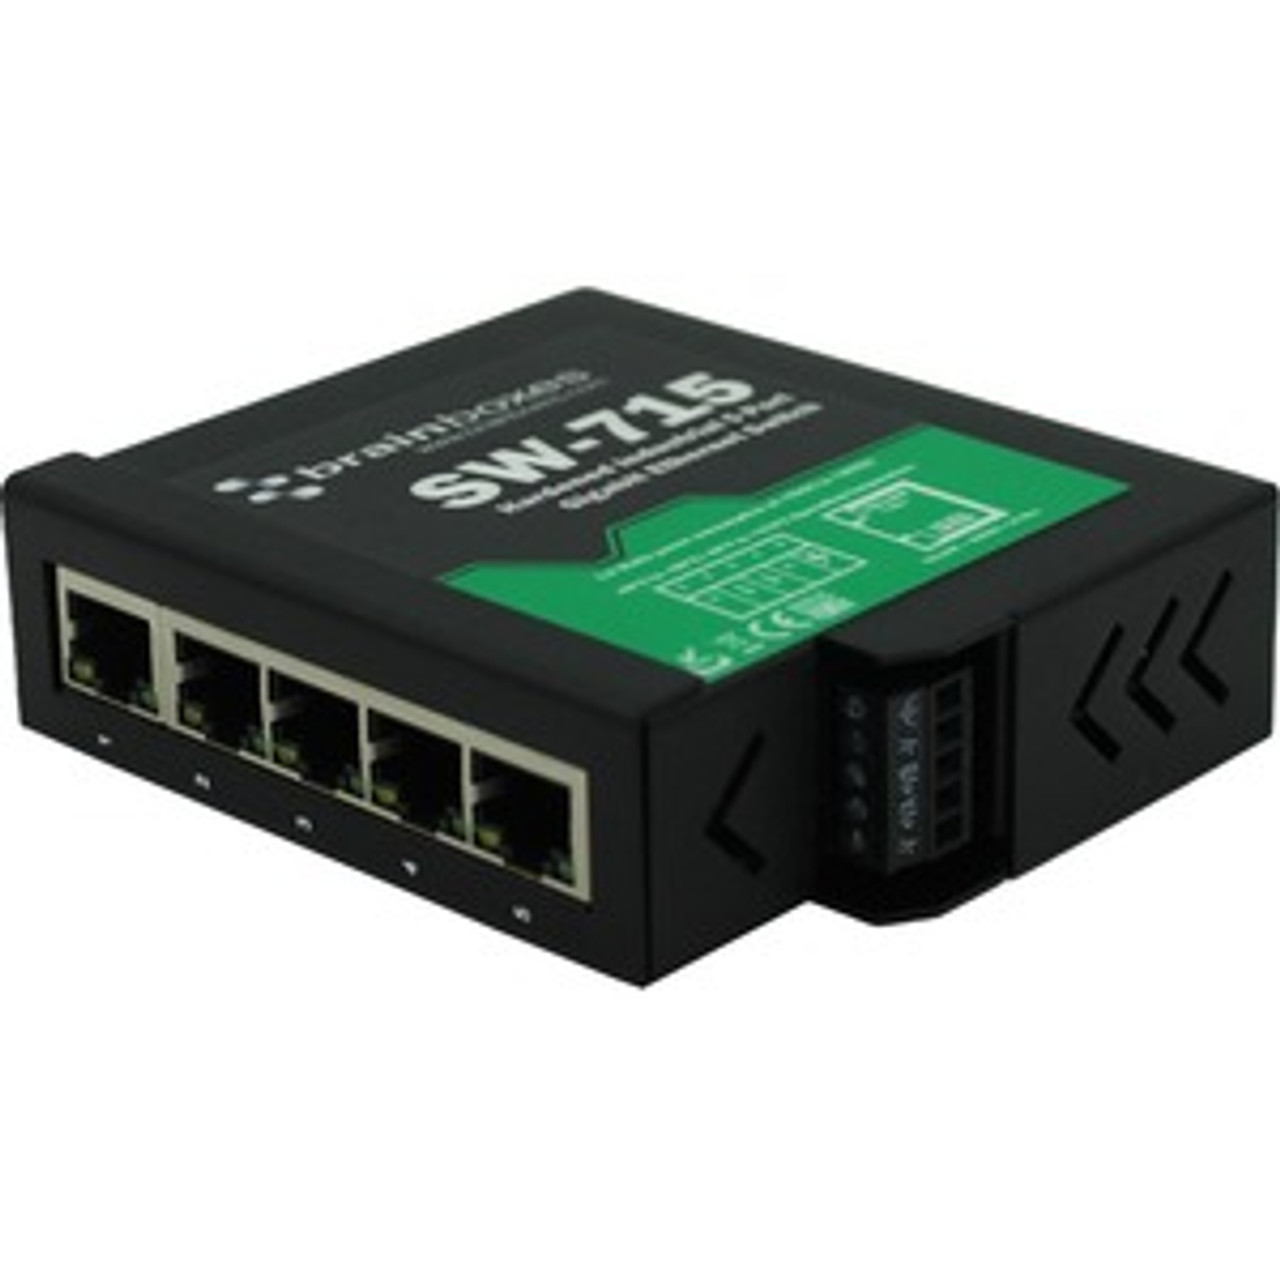 Industrial Ethernet Switches - Brainboxes